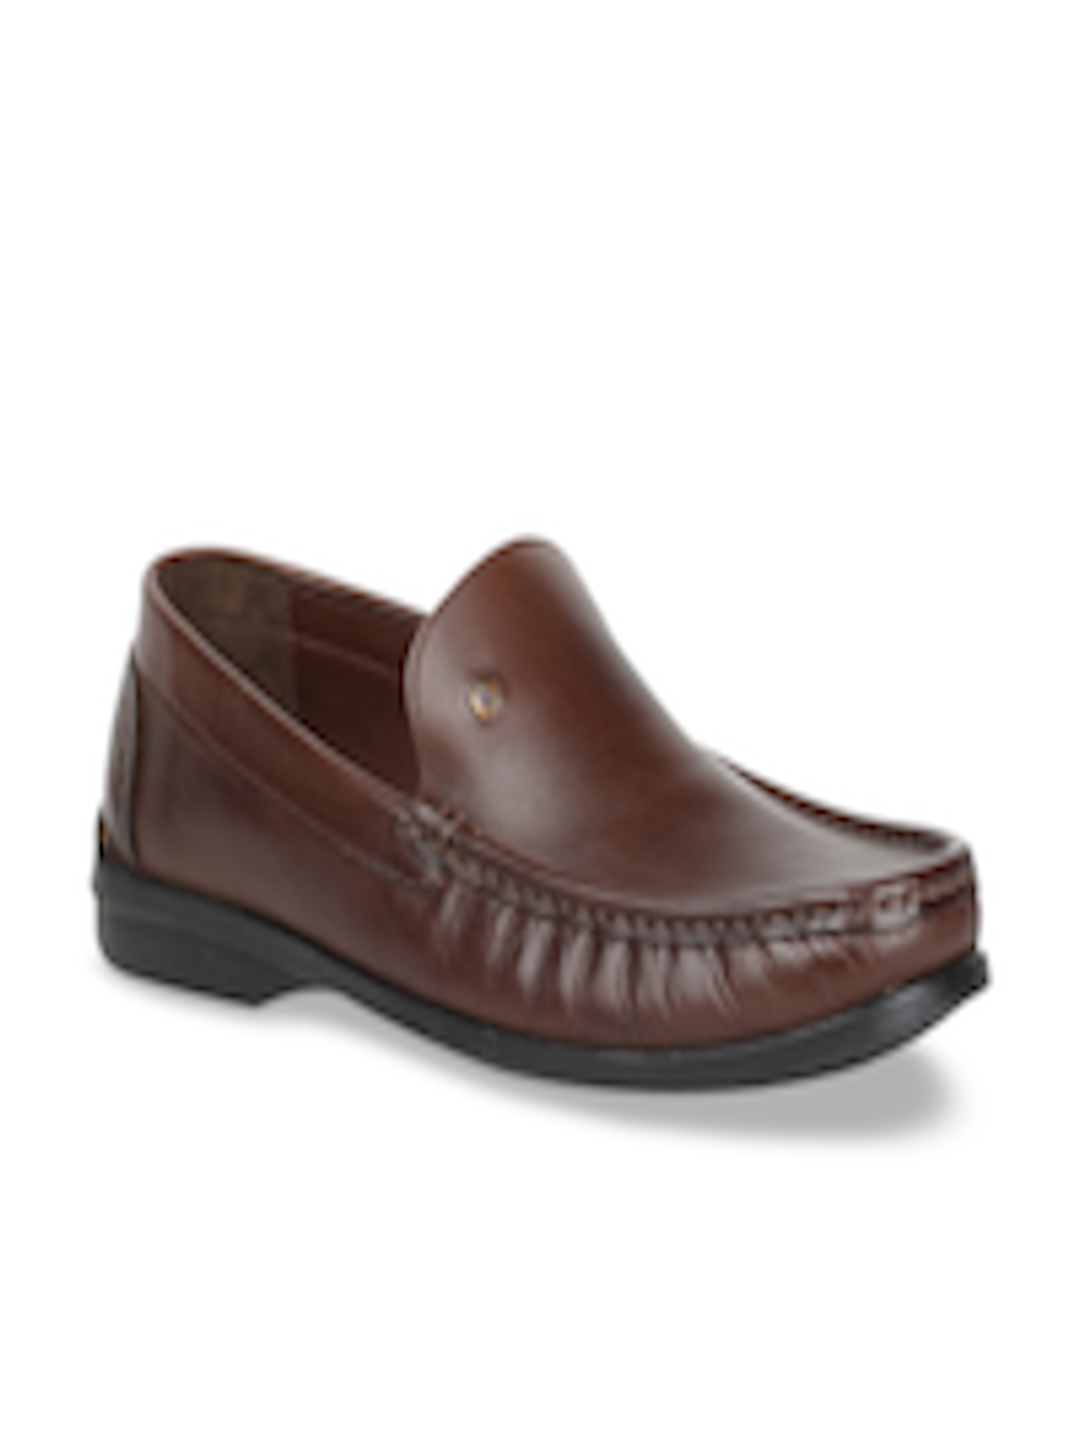 hush puppies shoes for men